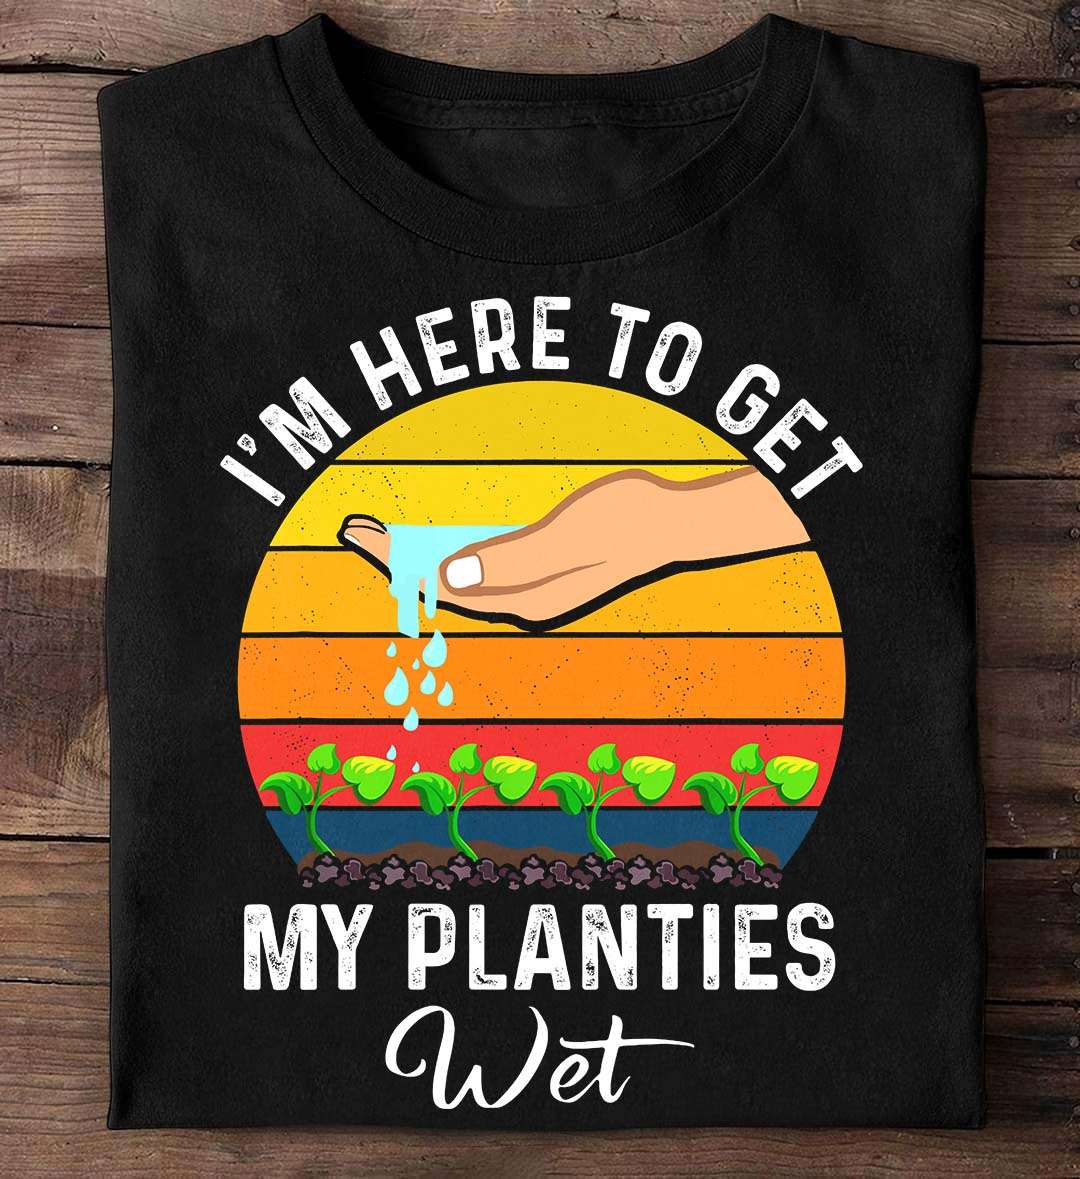 I'm here to get my planties wet - Watering the plants, plants lover